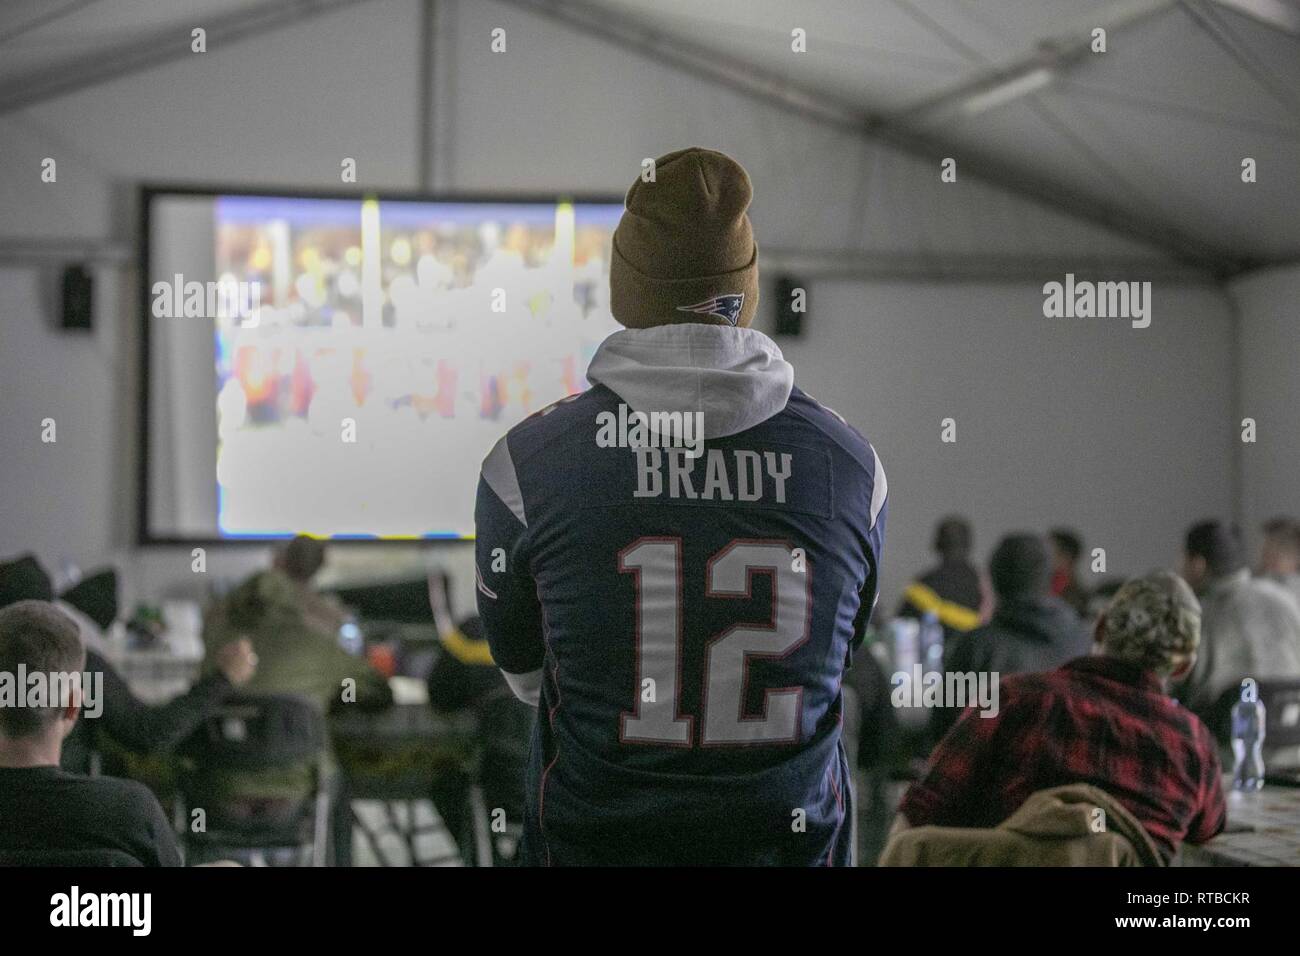 Super Bowl 53 High Resolution Stock Photography and Images - Alamy